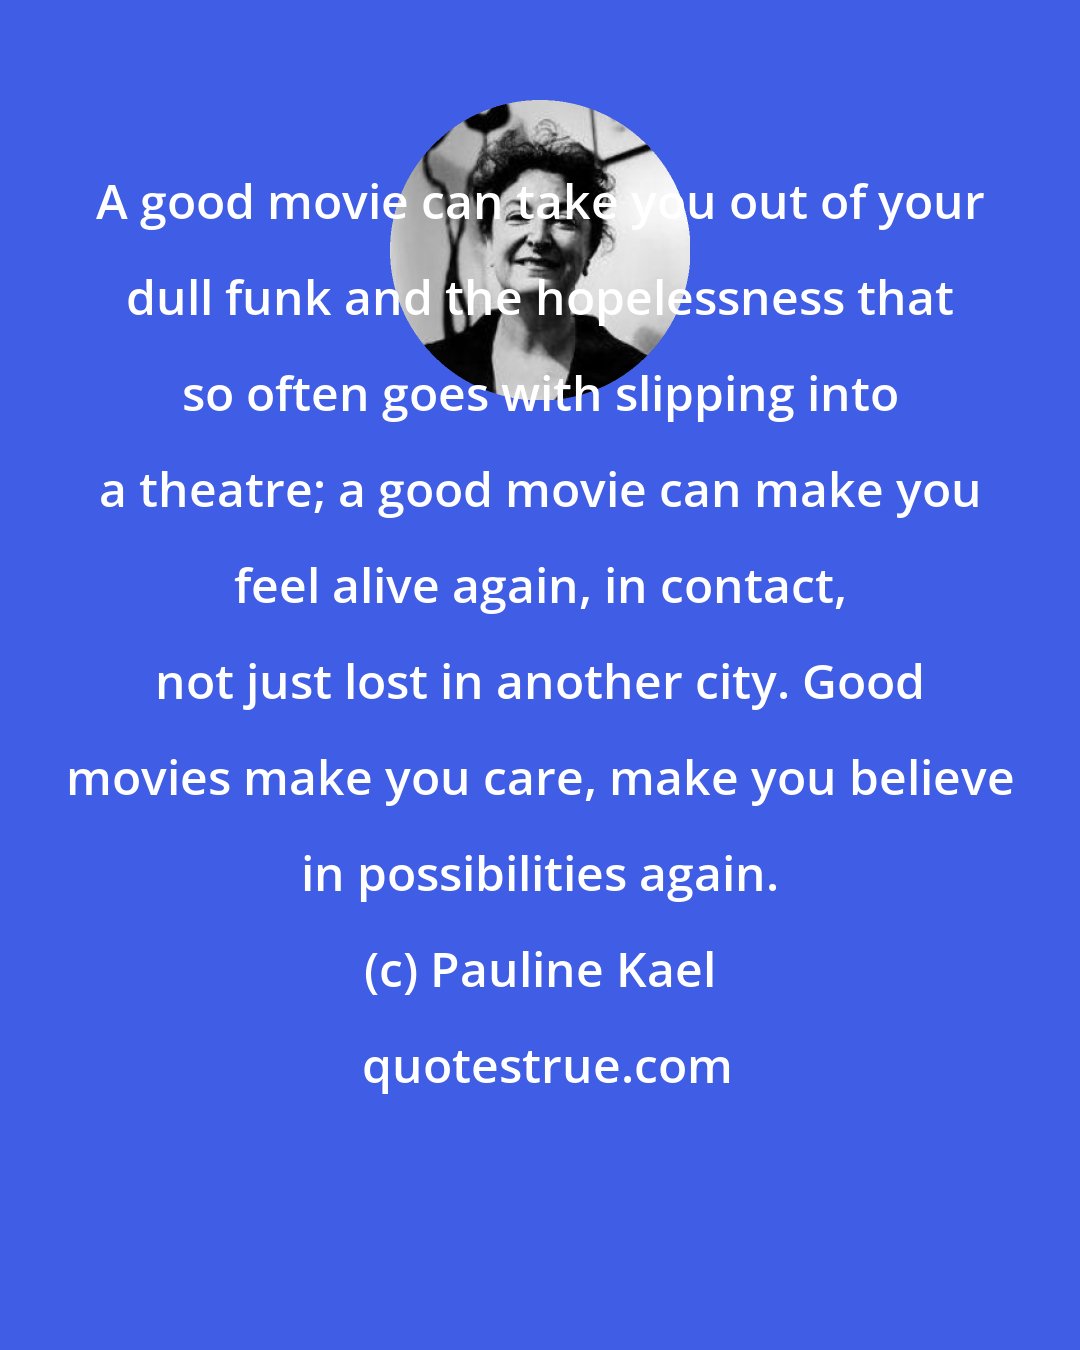 Pauline Kael: A good movie can take you out of your dull funk and the hopelessness that so often goes with slipping into a theatre; a good movie can make you feel alive again, in contact, not just lost in another city. Good movies make you care, make you believe in possibilities again.